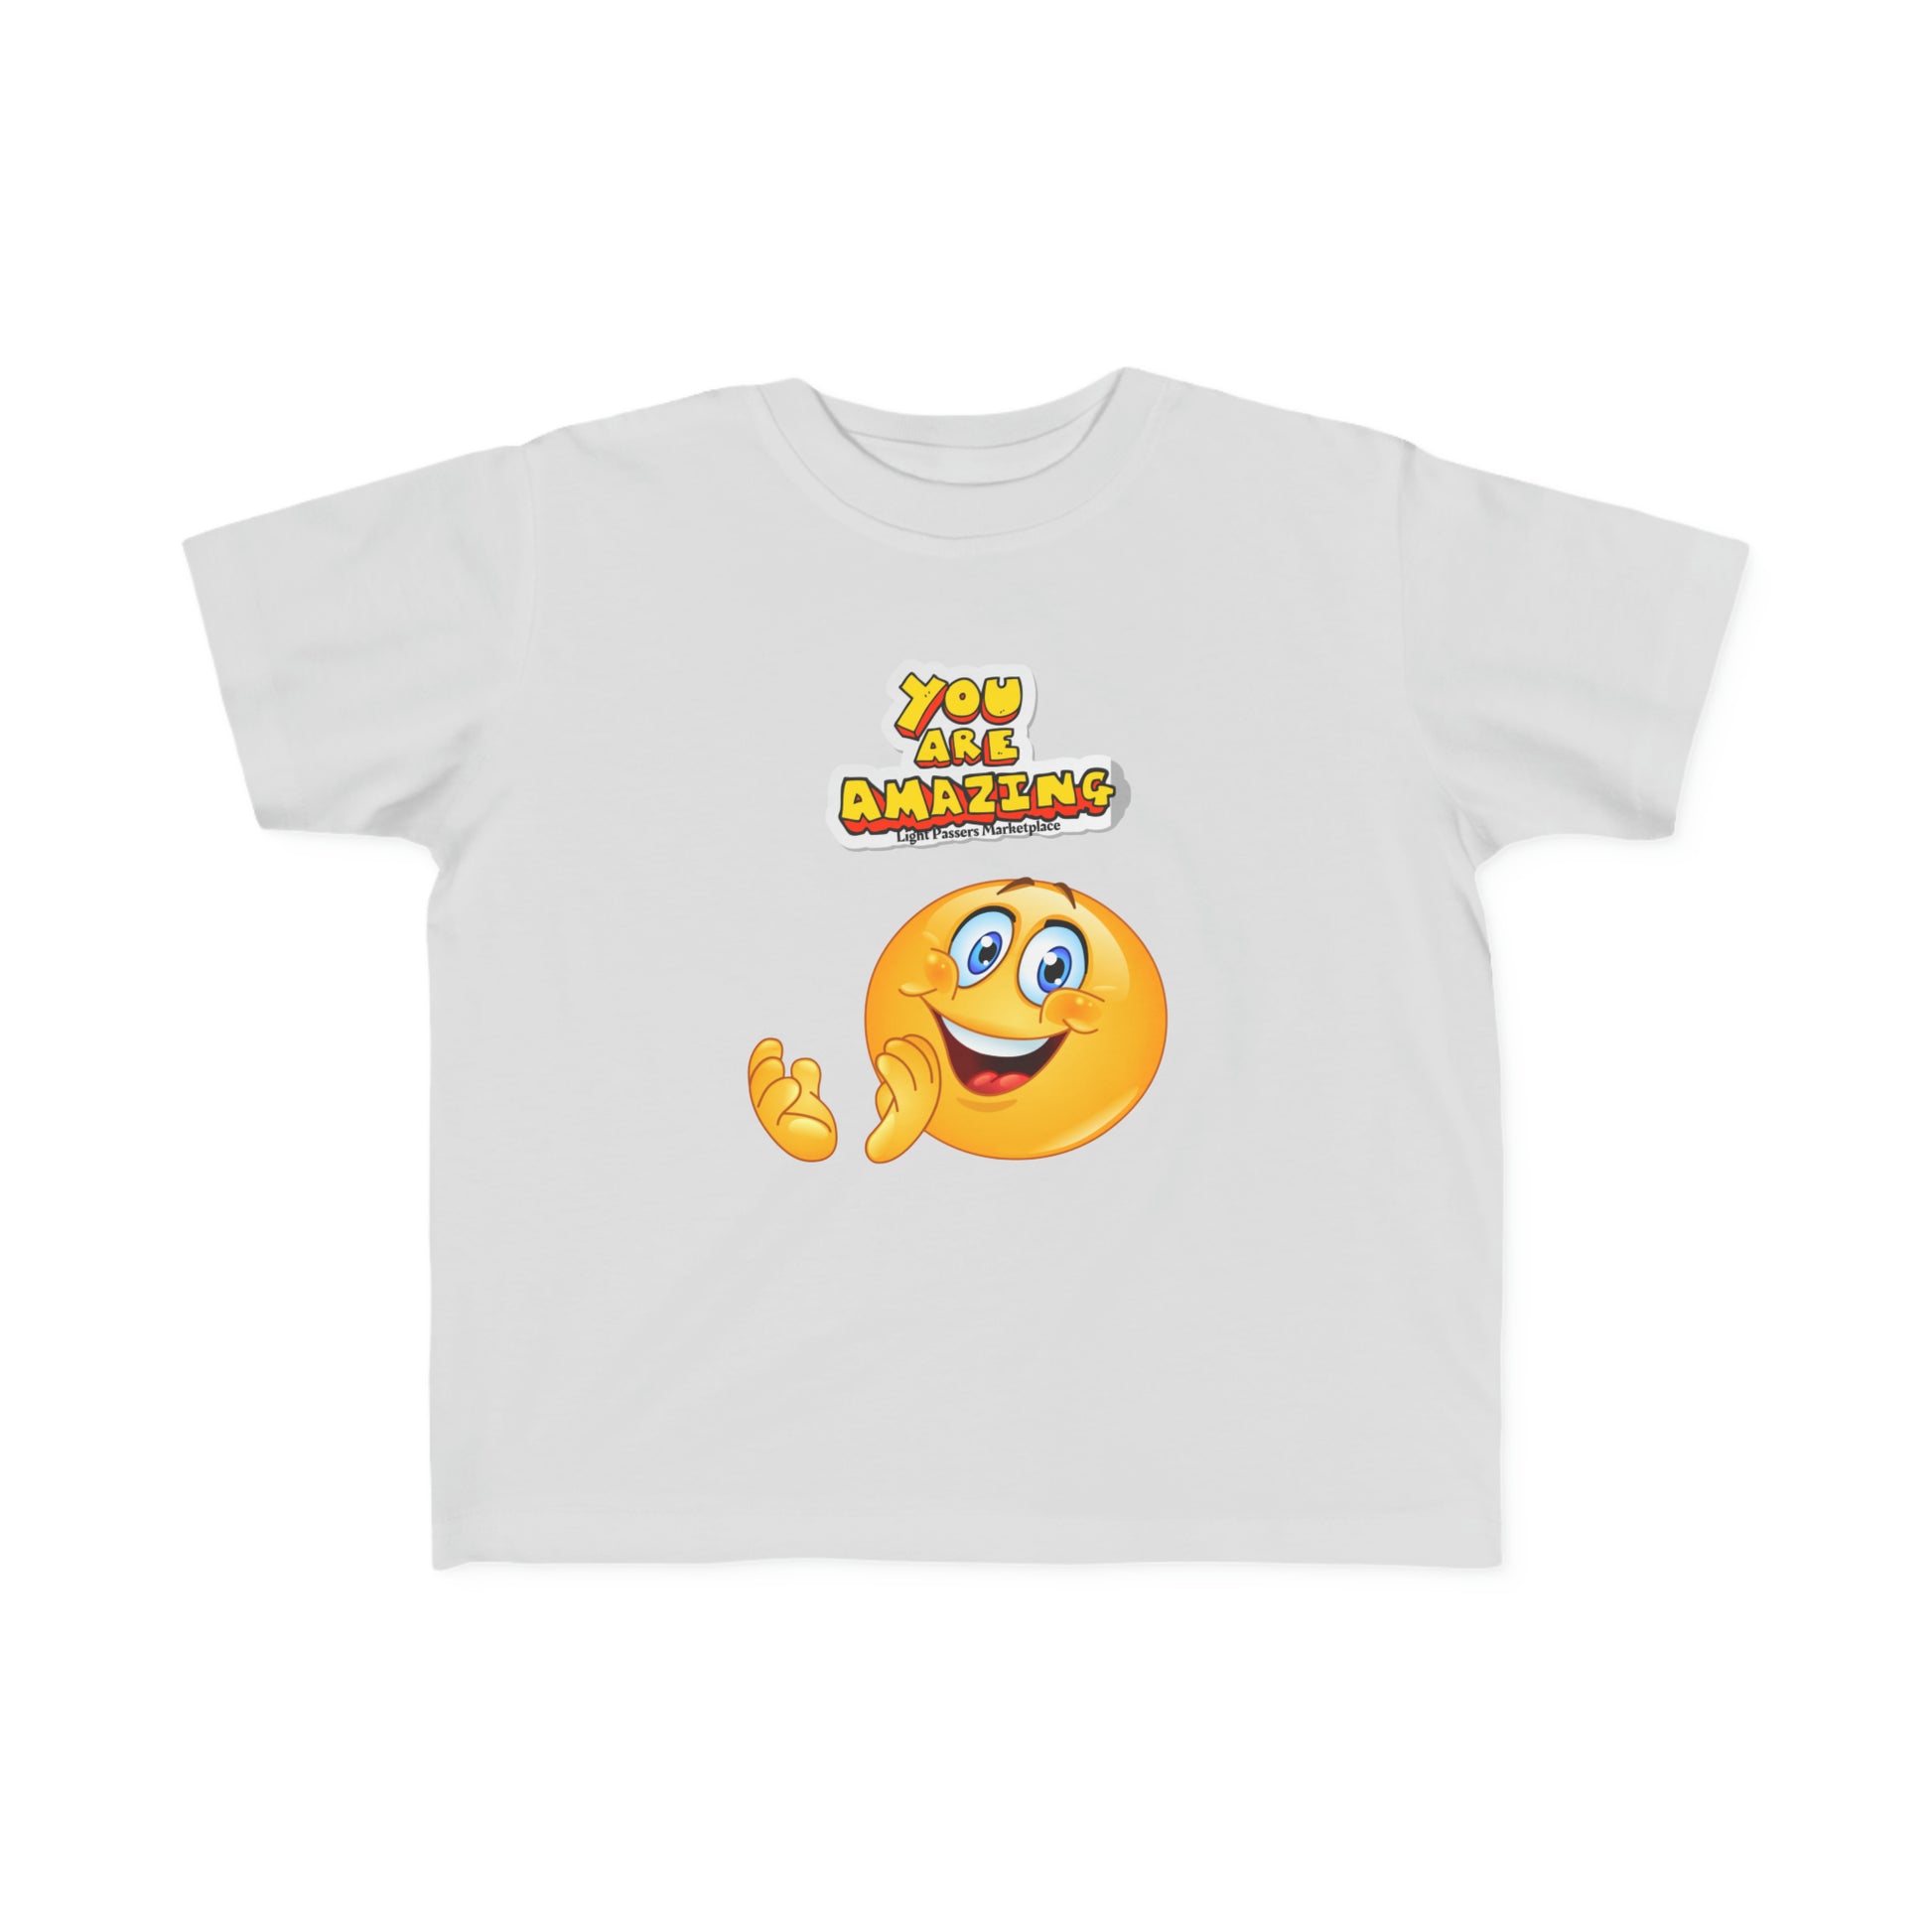 A white toddler t-shirt featuring a cartoon face design, made of soft 100% combed, ring-spun cotton. Durable print, light fabric, tear-away label, classic fit, true to size.